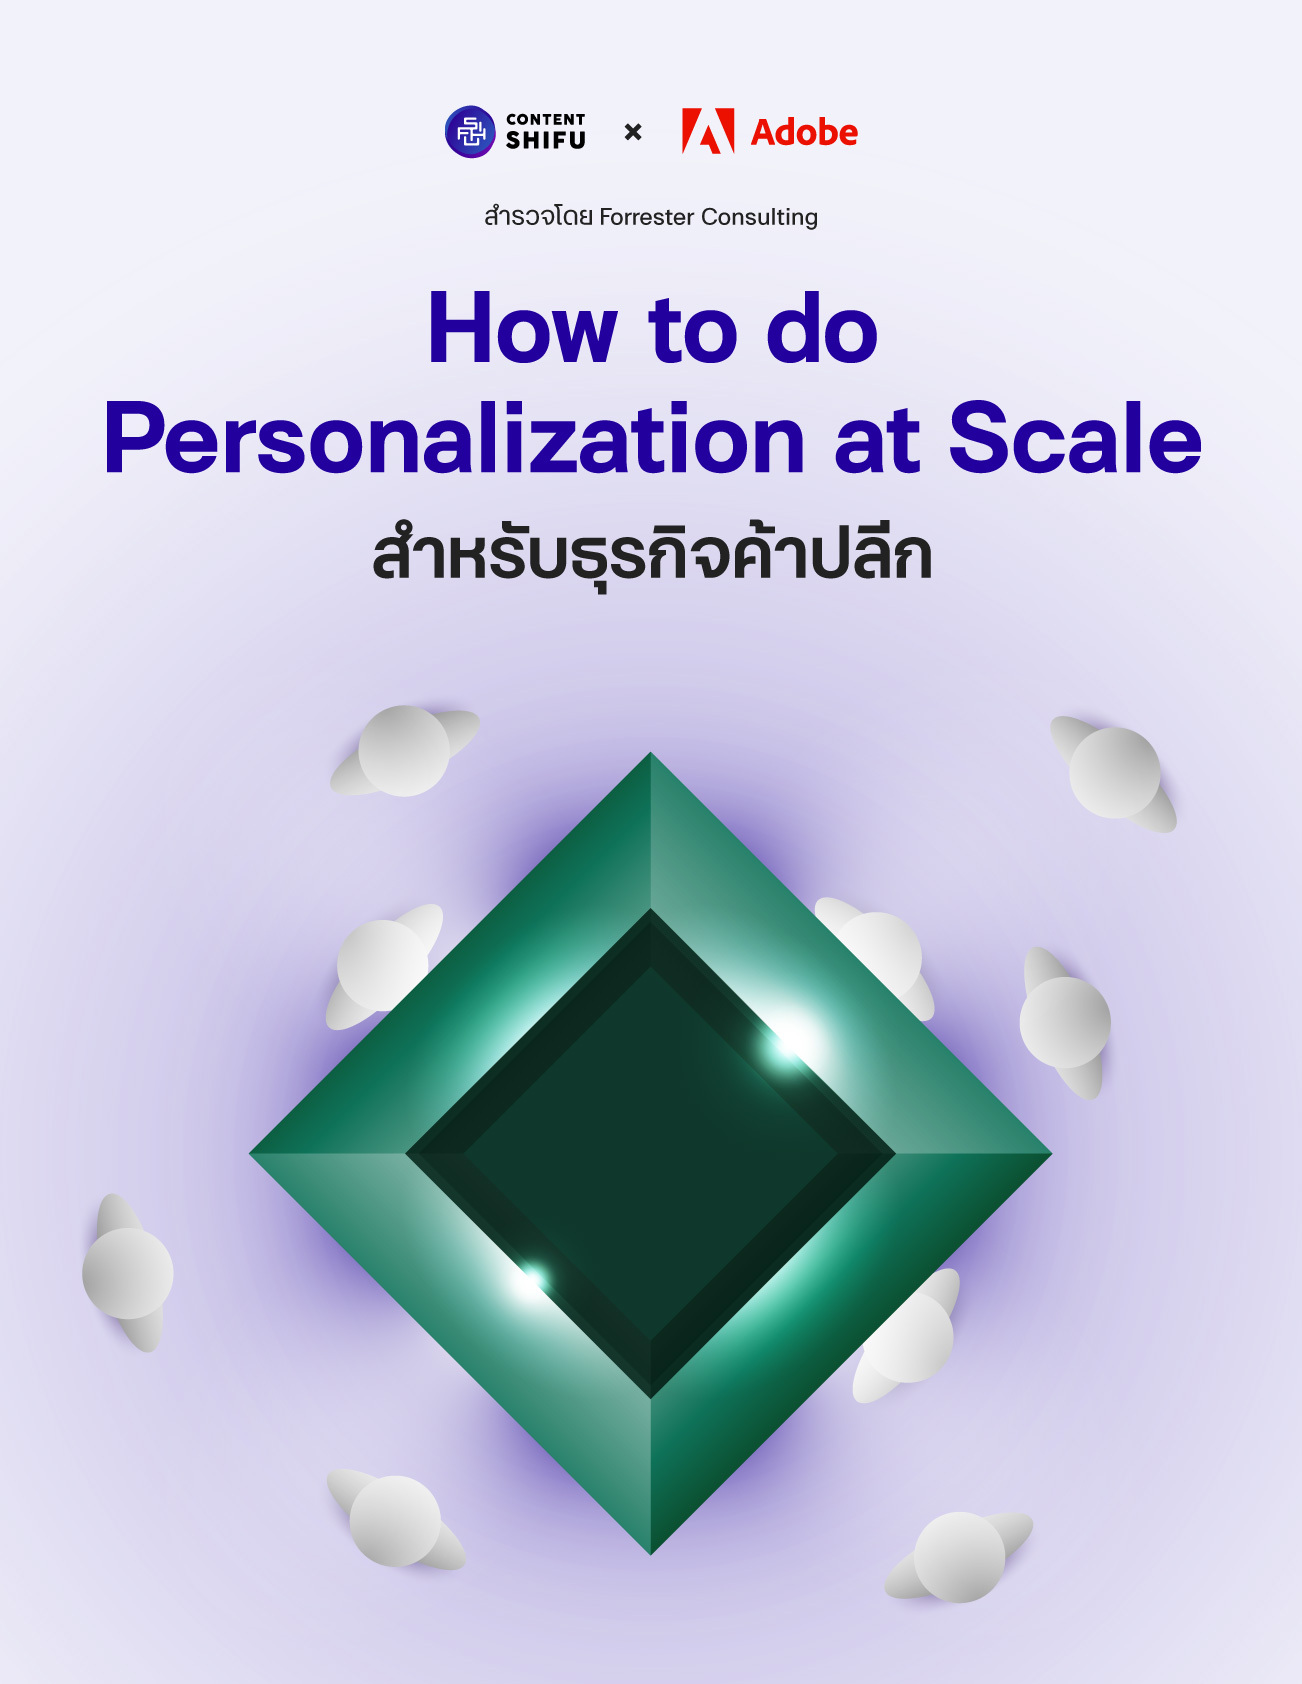 How to do Personalization at Scale